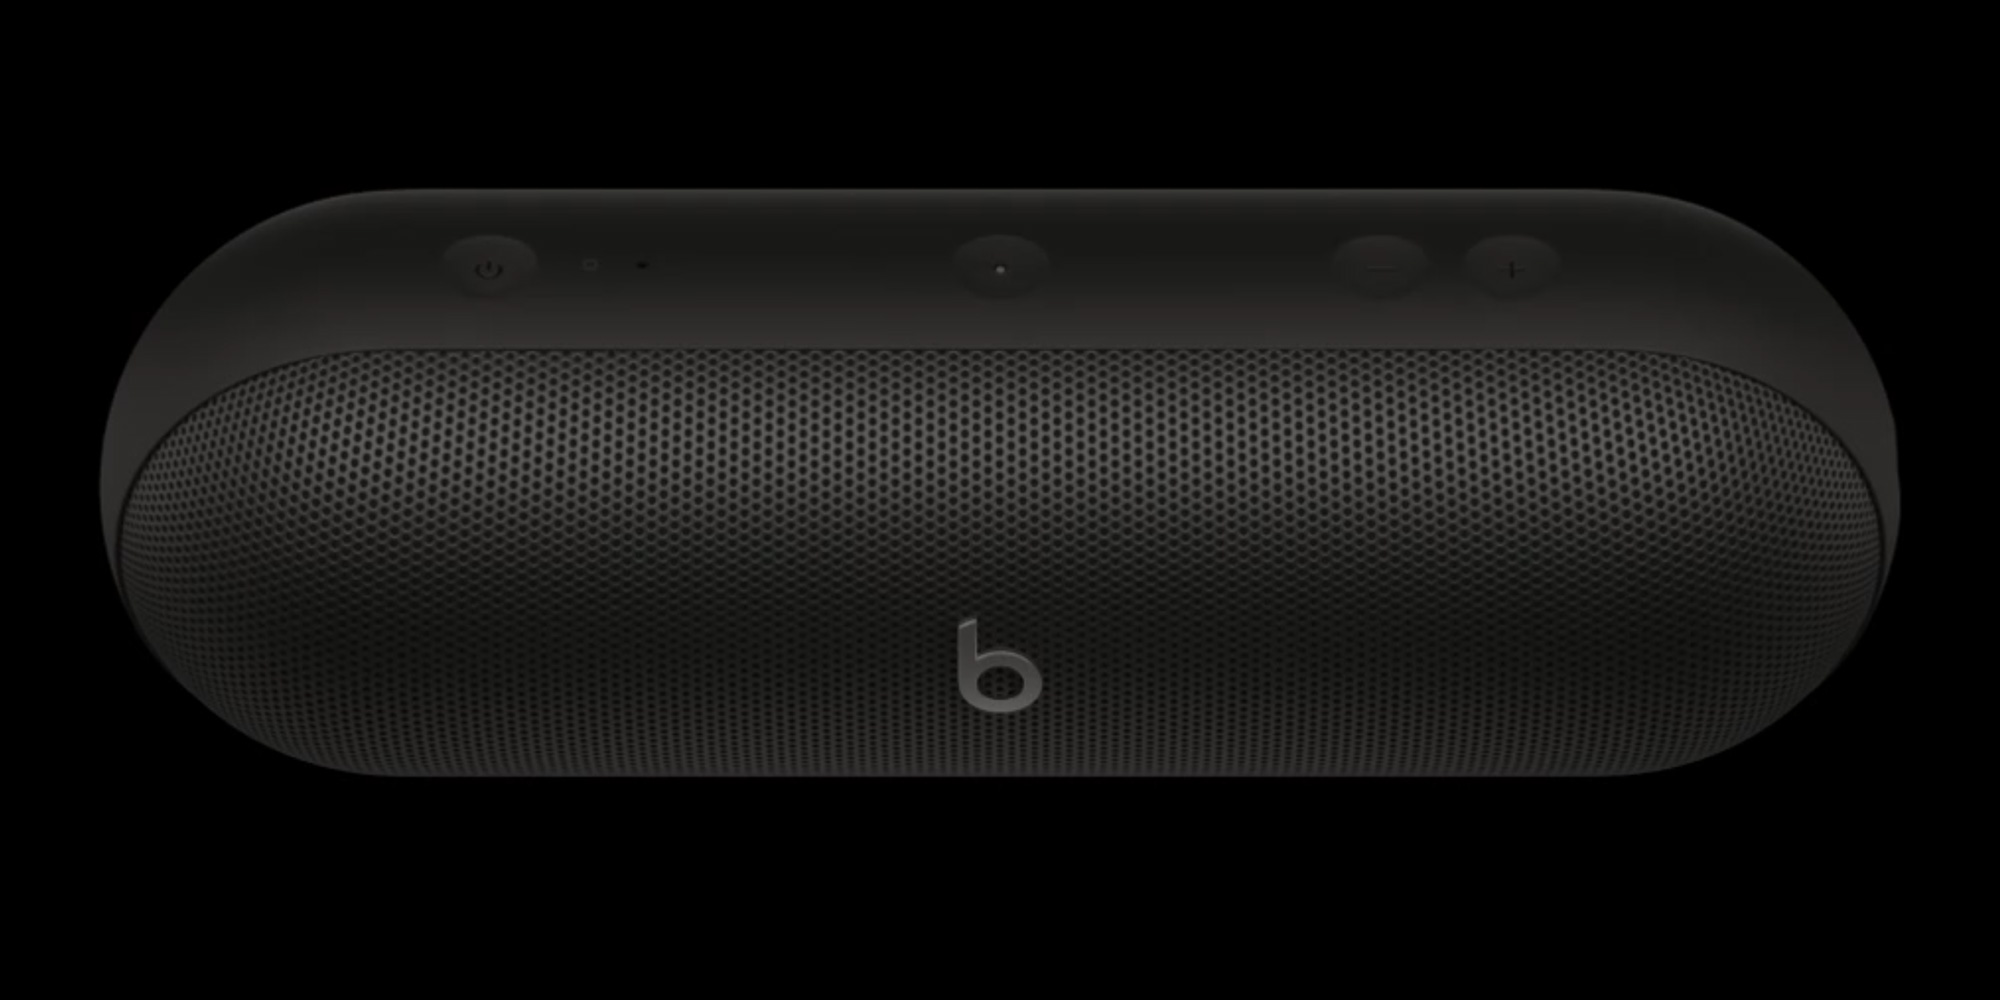 New generation Beats Pill speaker confirmed by iOS 17.5 RC code